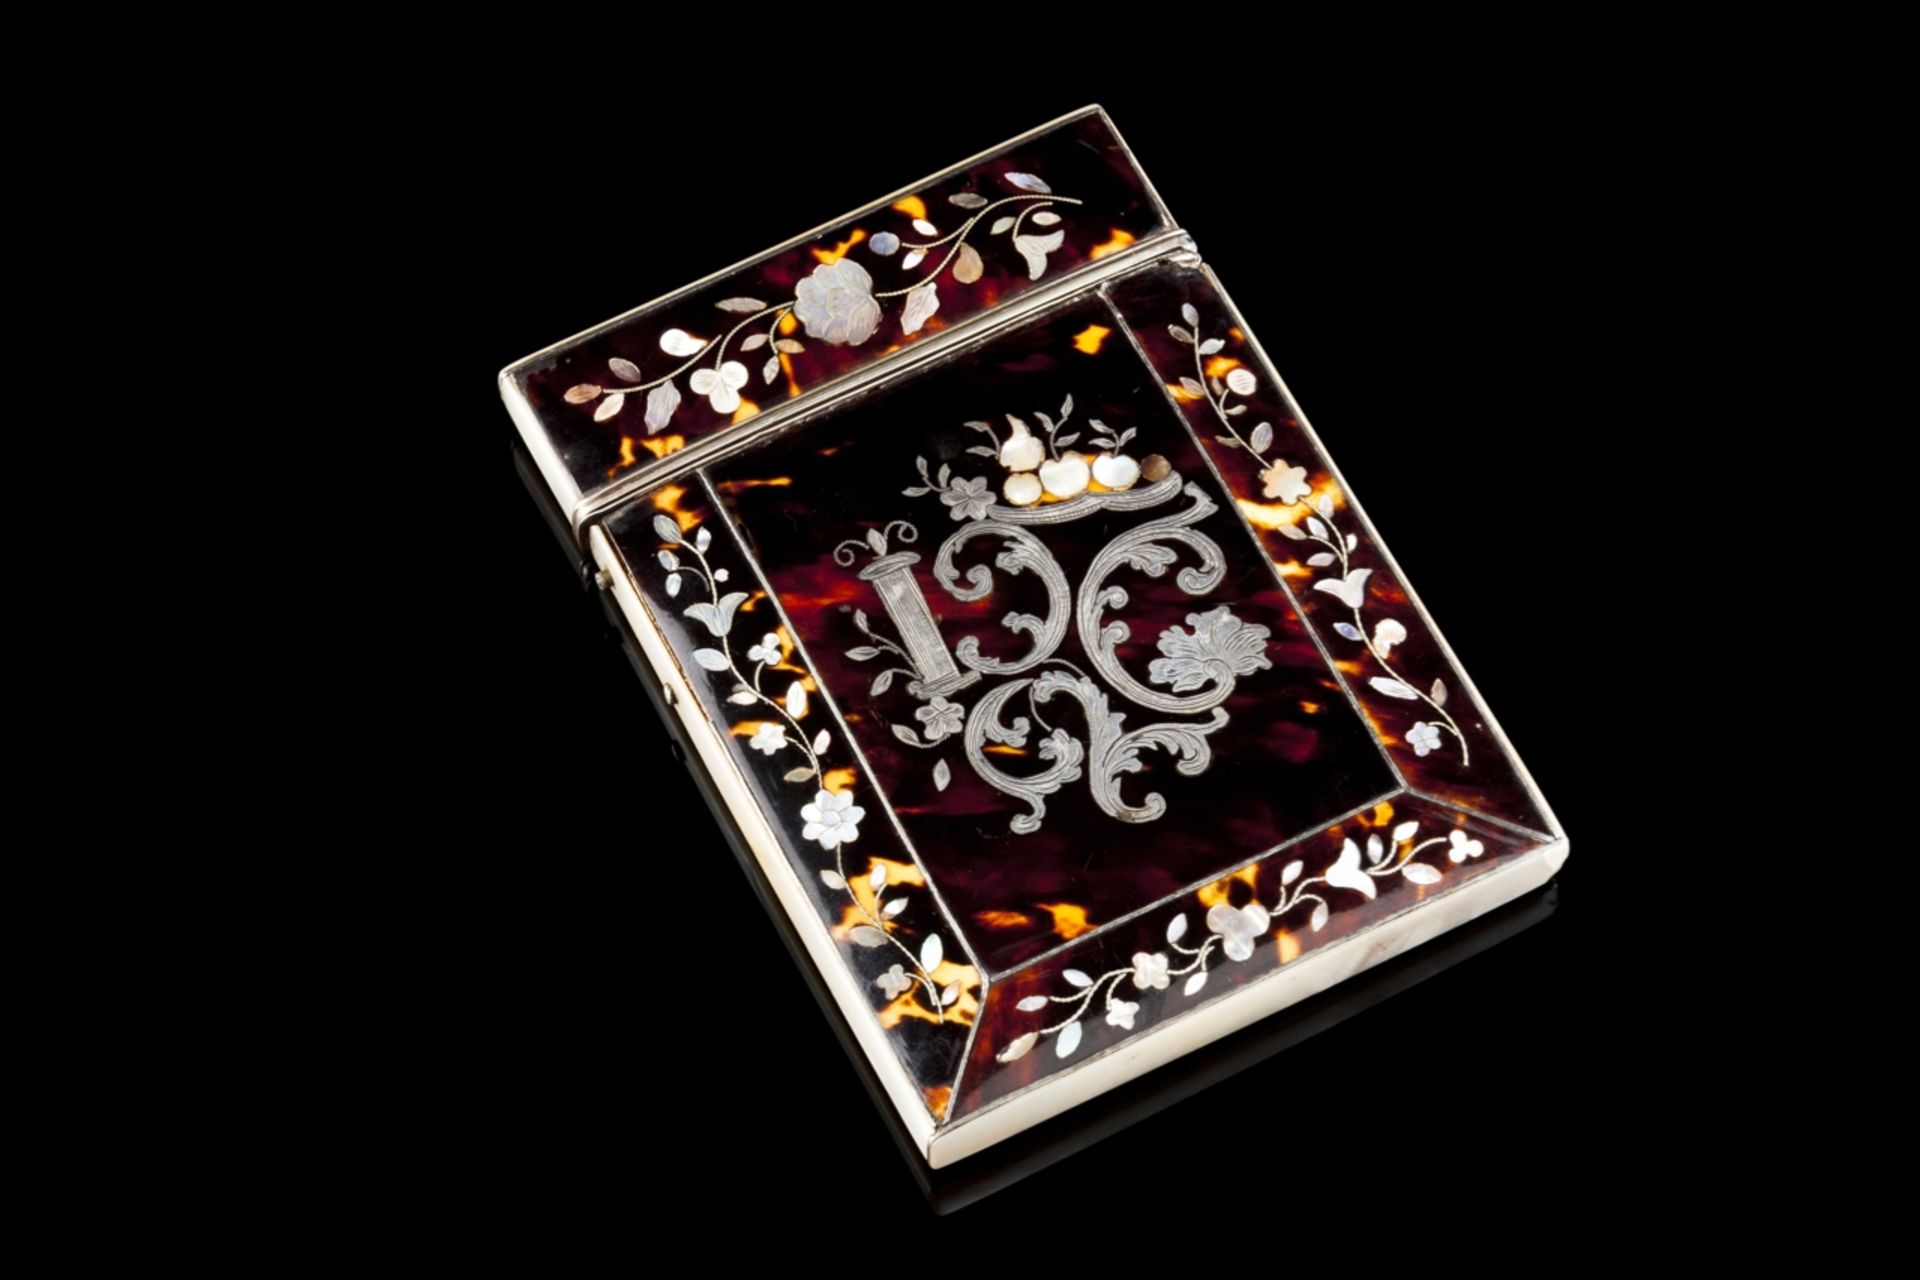 A Tortoiseshell, mother-of-pearl and silver cardbox
Decorated with floral motifs and cathedral
(